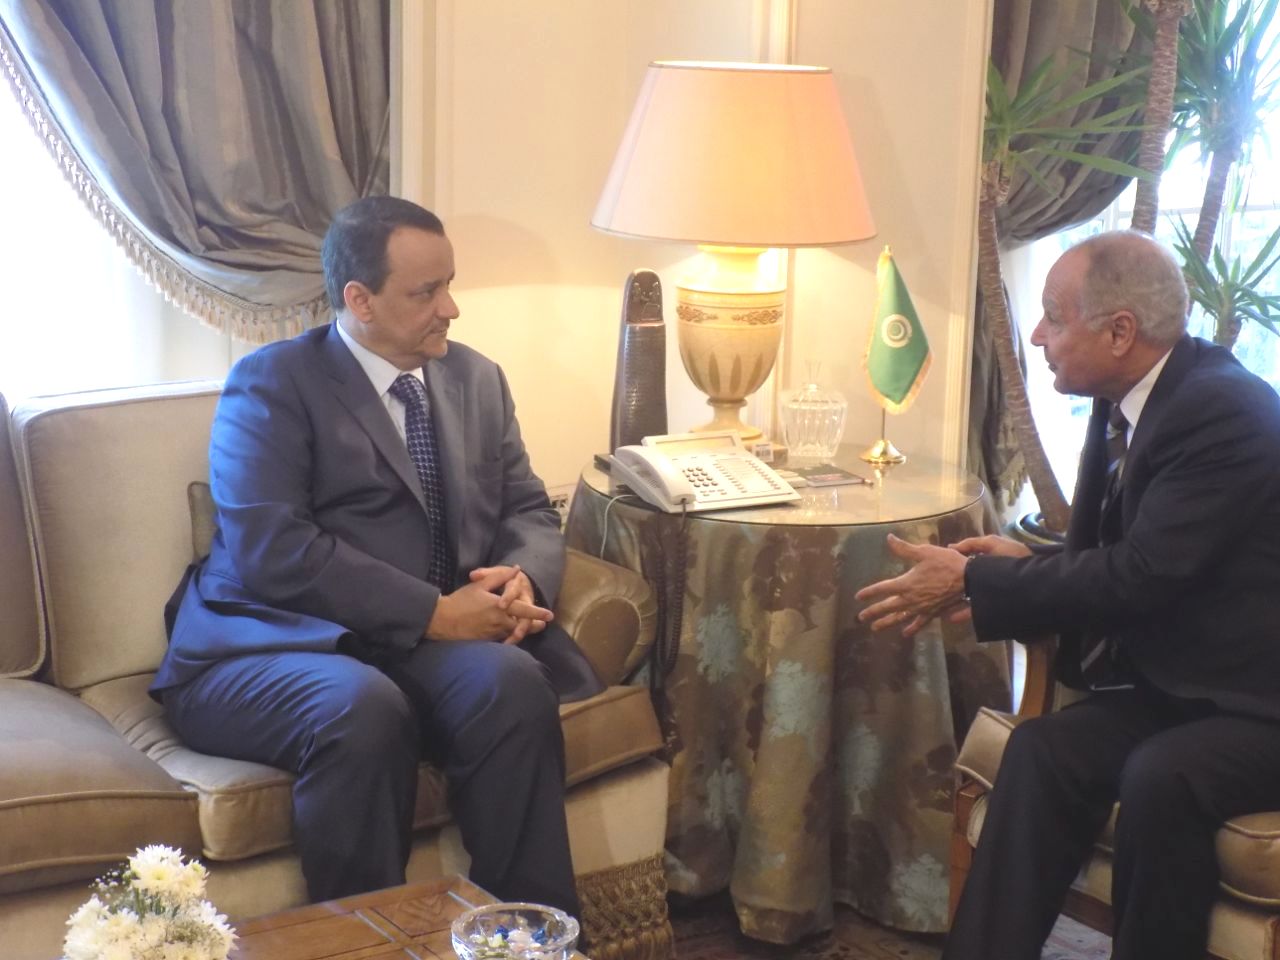 Arab League's Secretary General Ahmad Abul-Gheit met with UN's Special Envoy for Yemen Ismail Ould Cheikh Ahmed